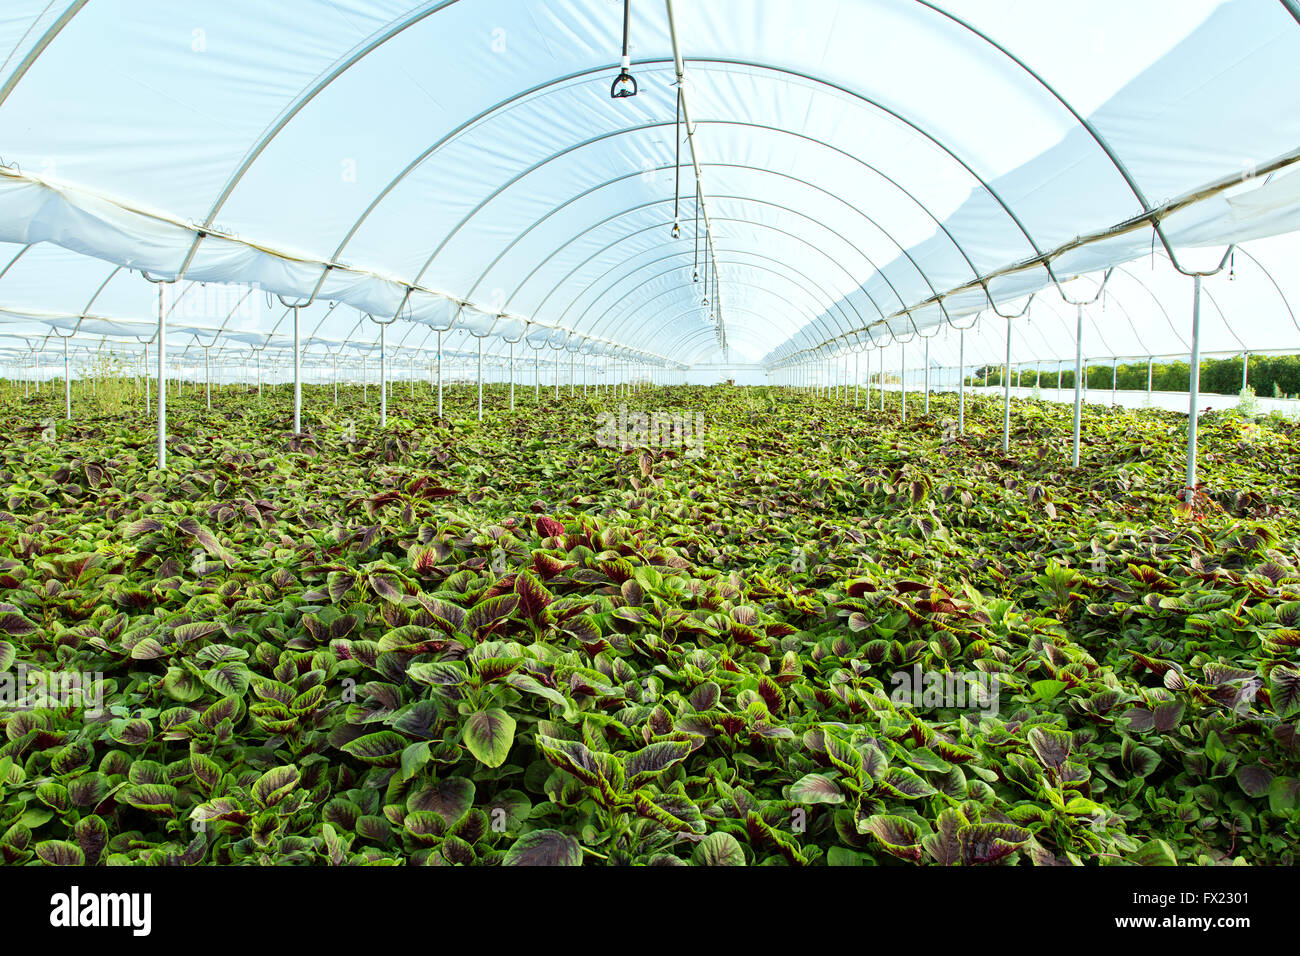 Jan choi, Chinese spinach growing in greenhouse. Stock Photo